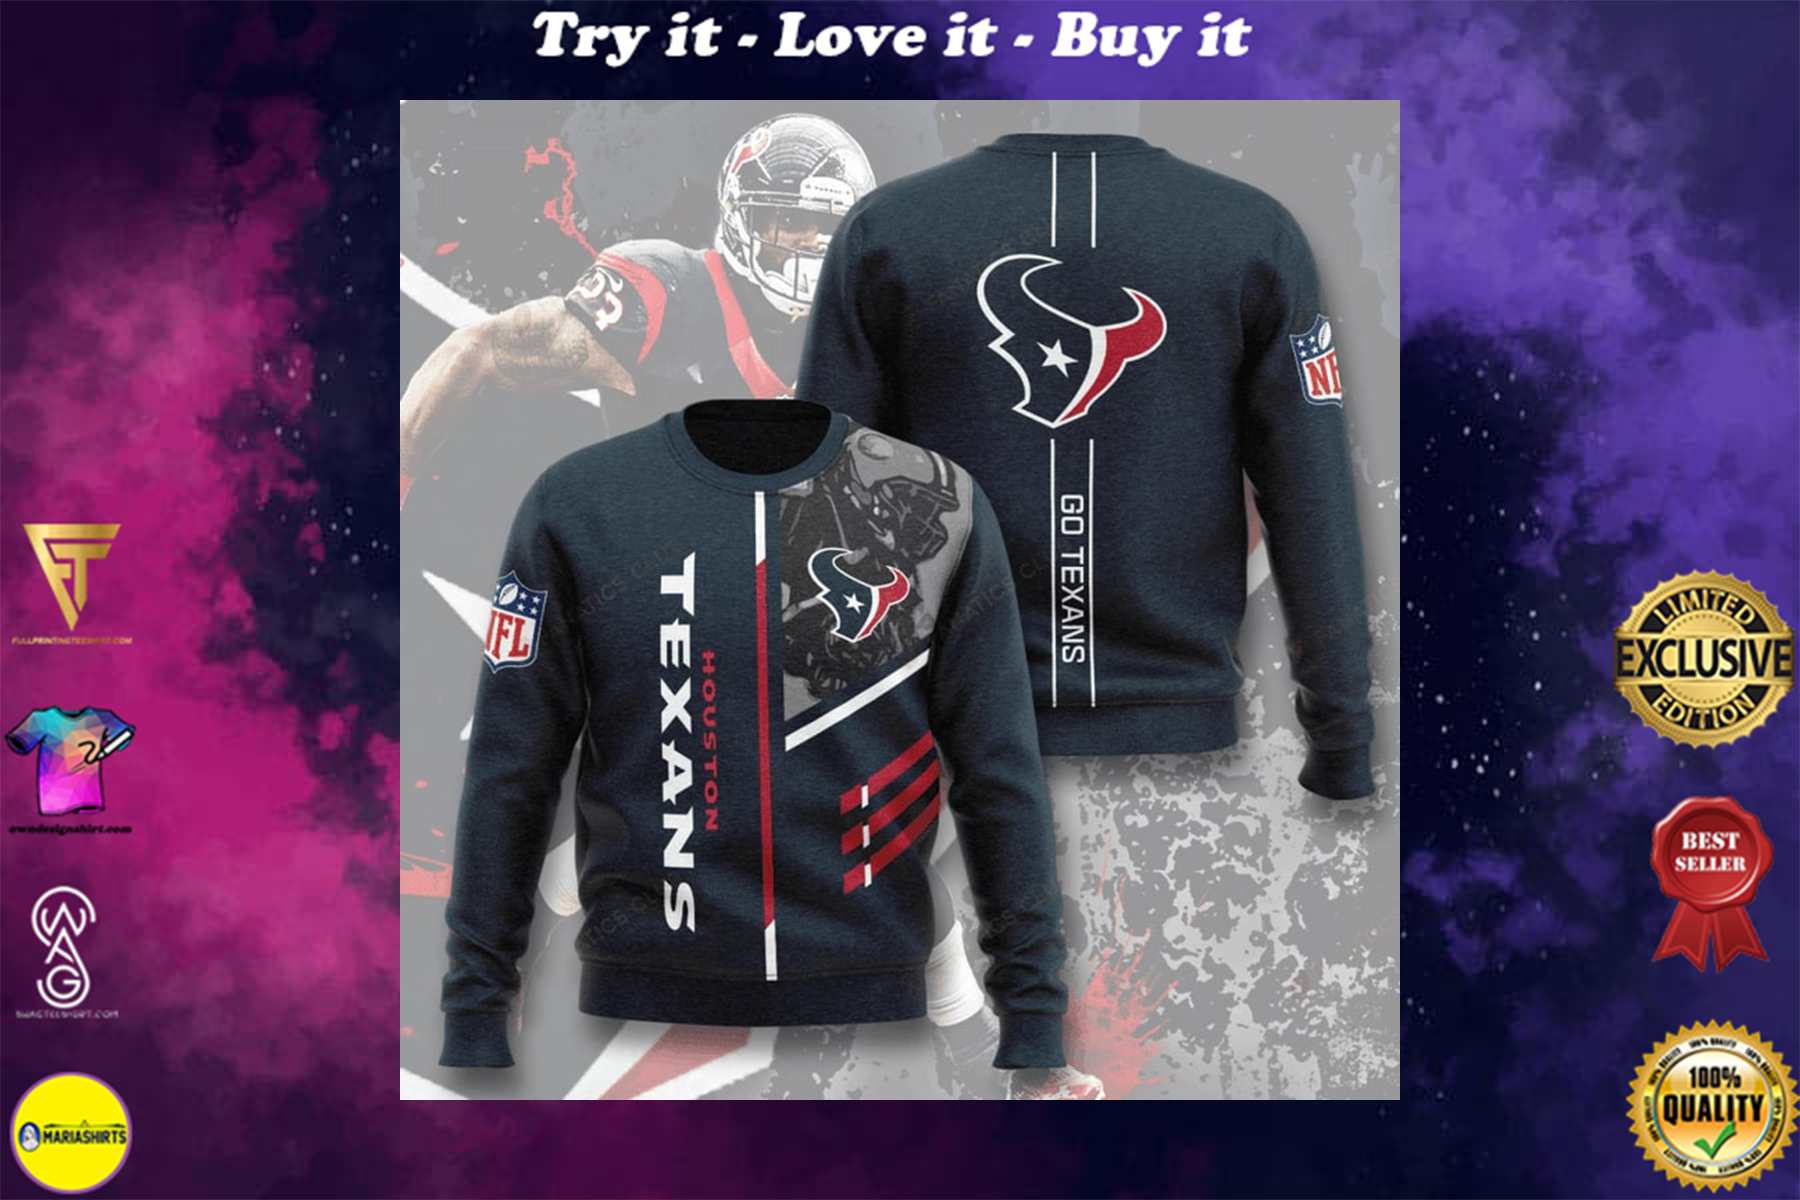 [highest selling] national football league houston texans go texans full printing ugly sweater - maria